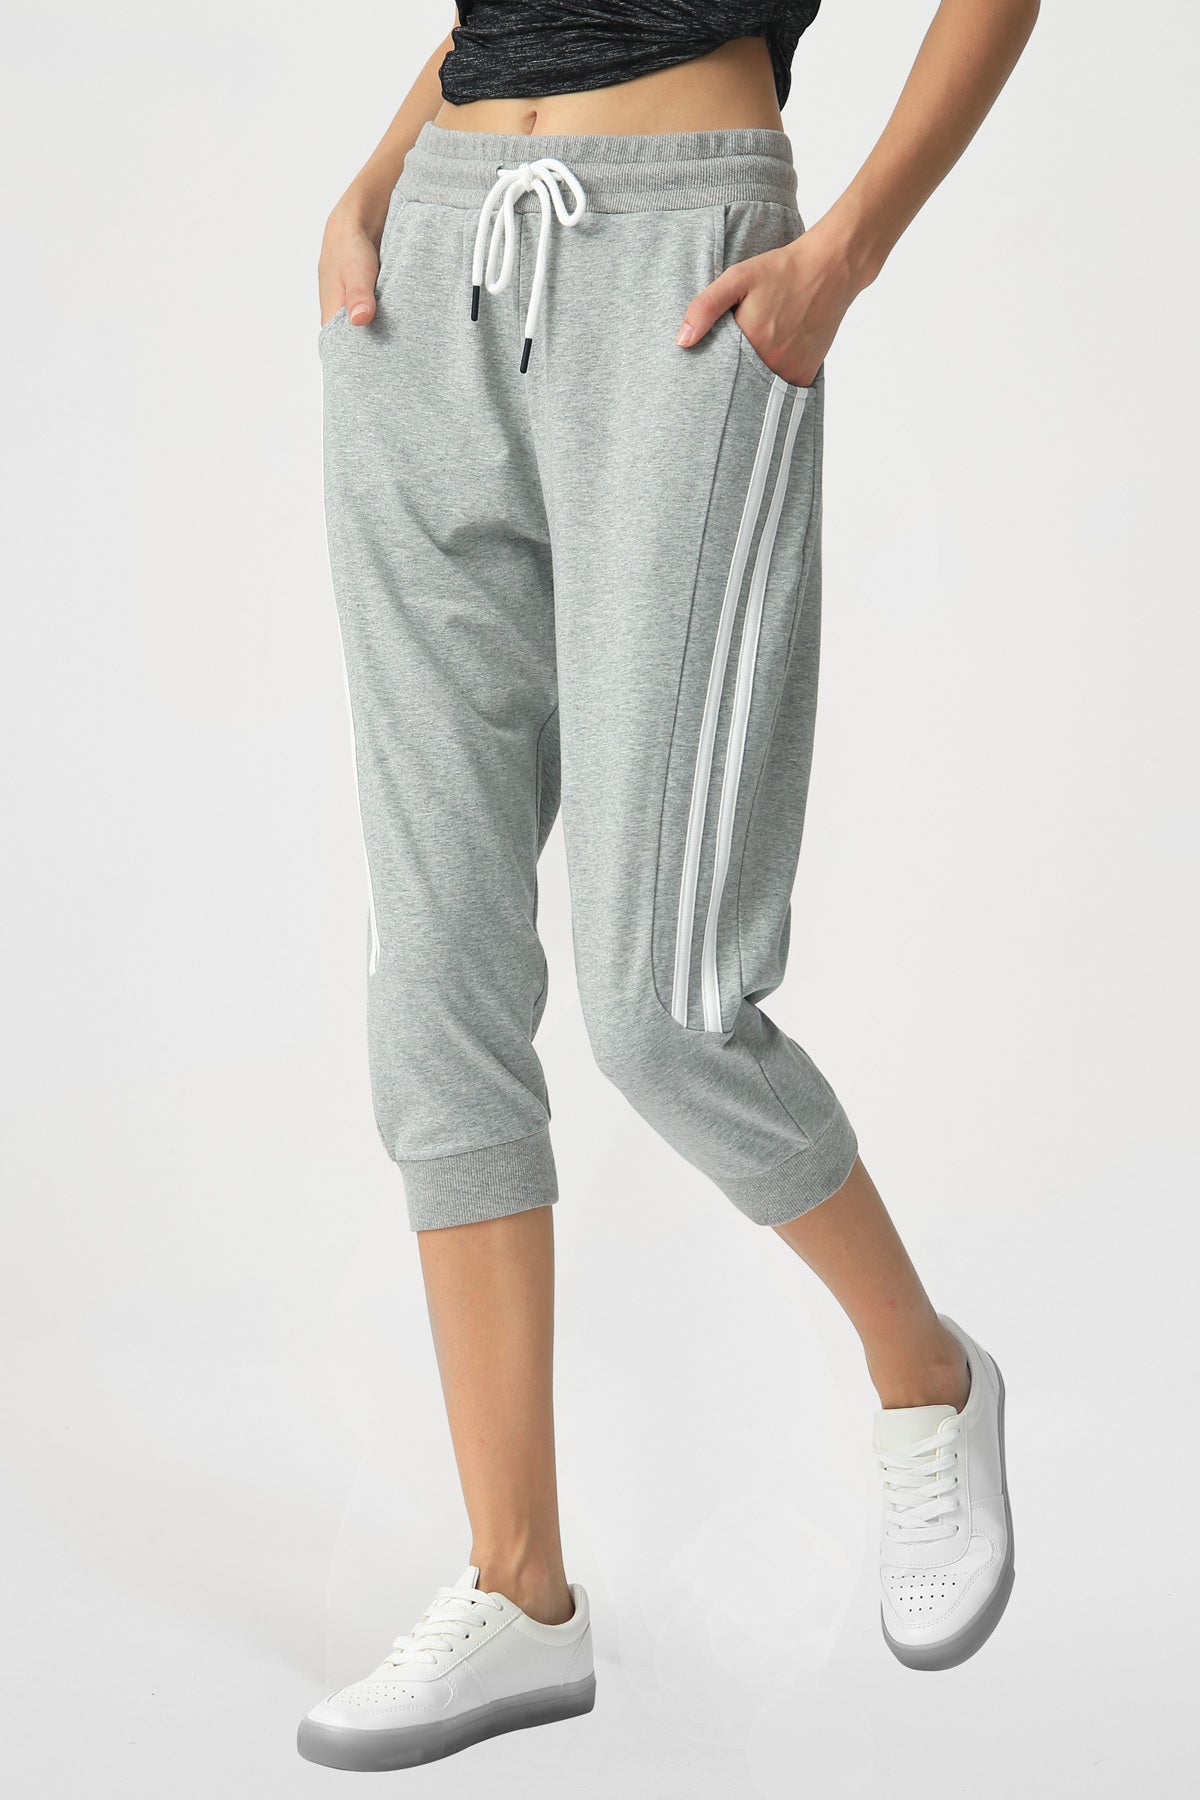 Women's Capri Jogger Sweatpants with Pockets Gym Running Cropped